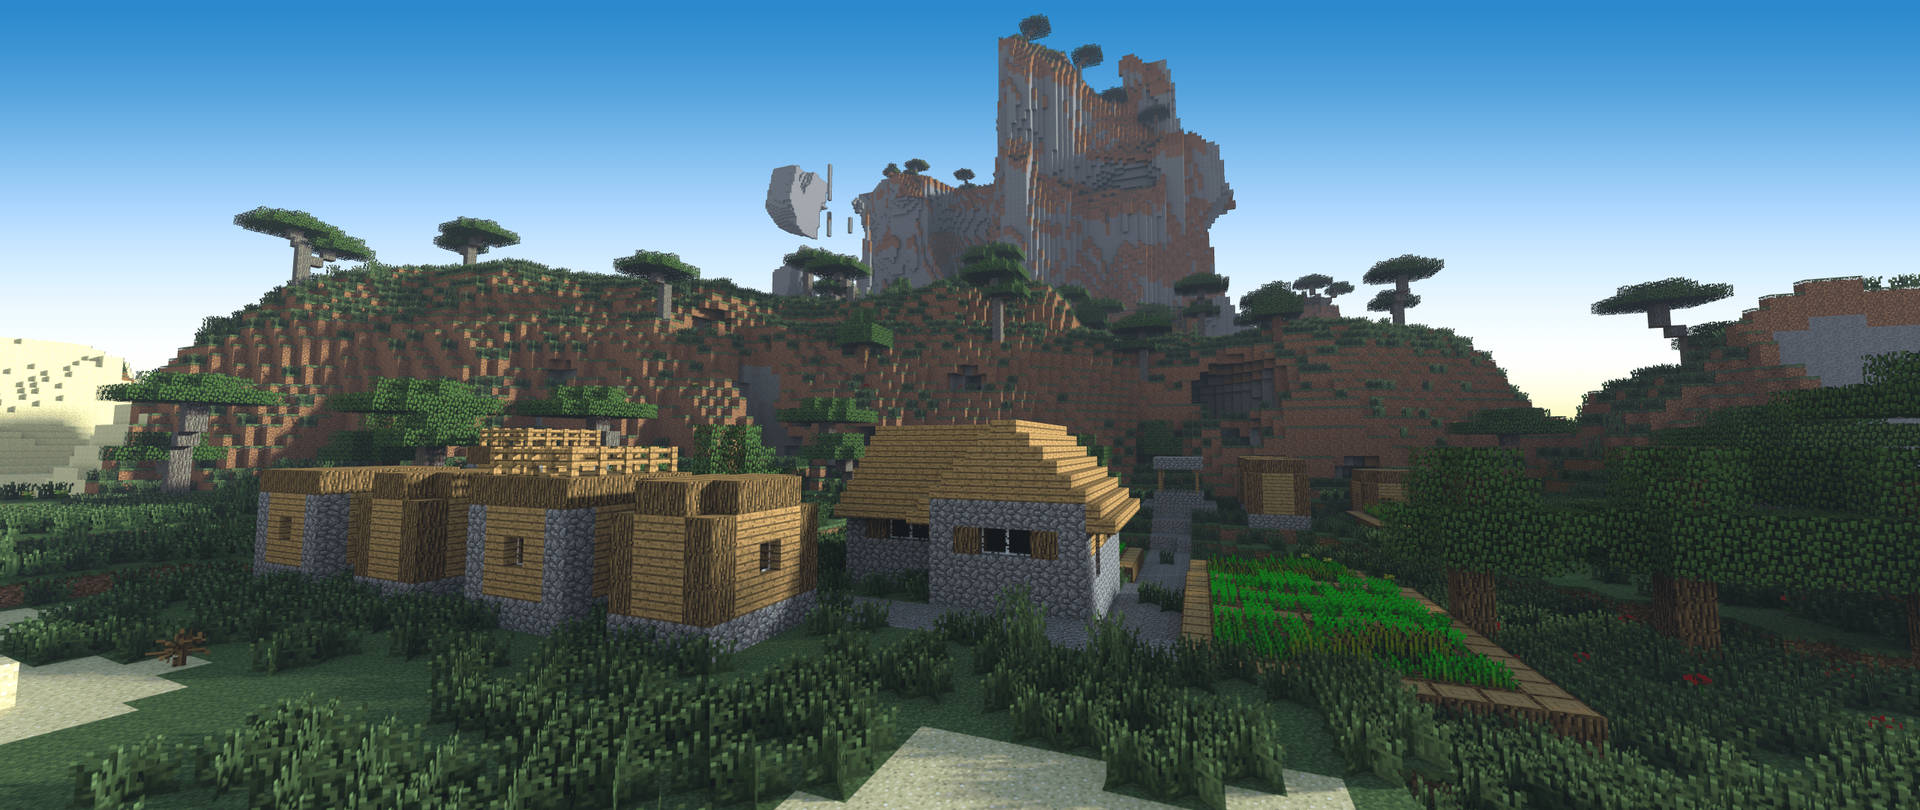 Minecraft 2560X1080 Wallpaper and Background Image